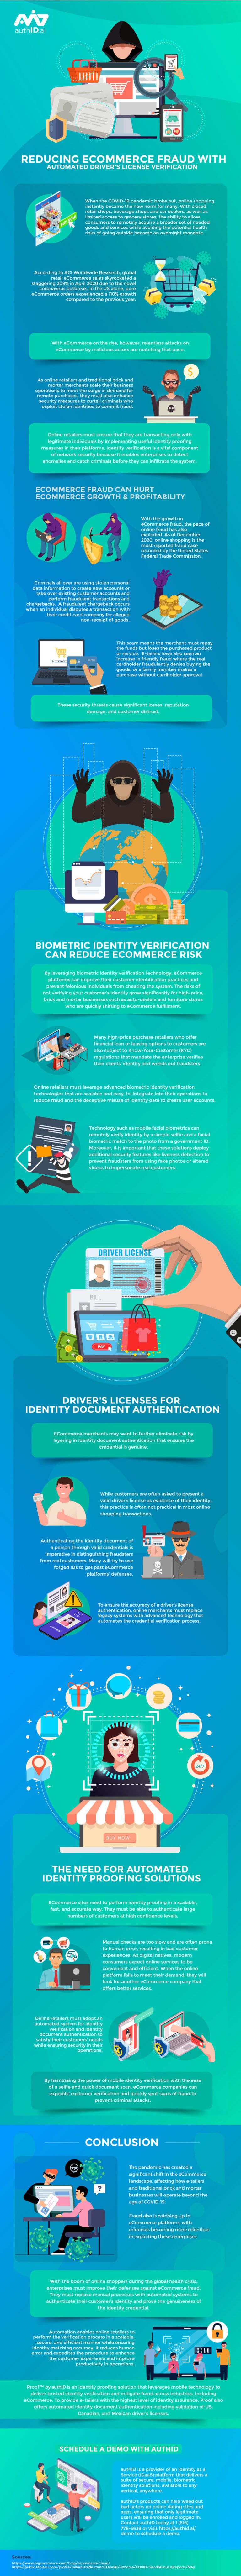 Reducing eCommerce Fraud with Automated Driver’s License Verification